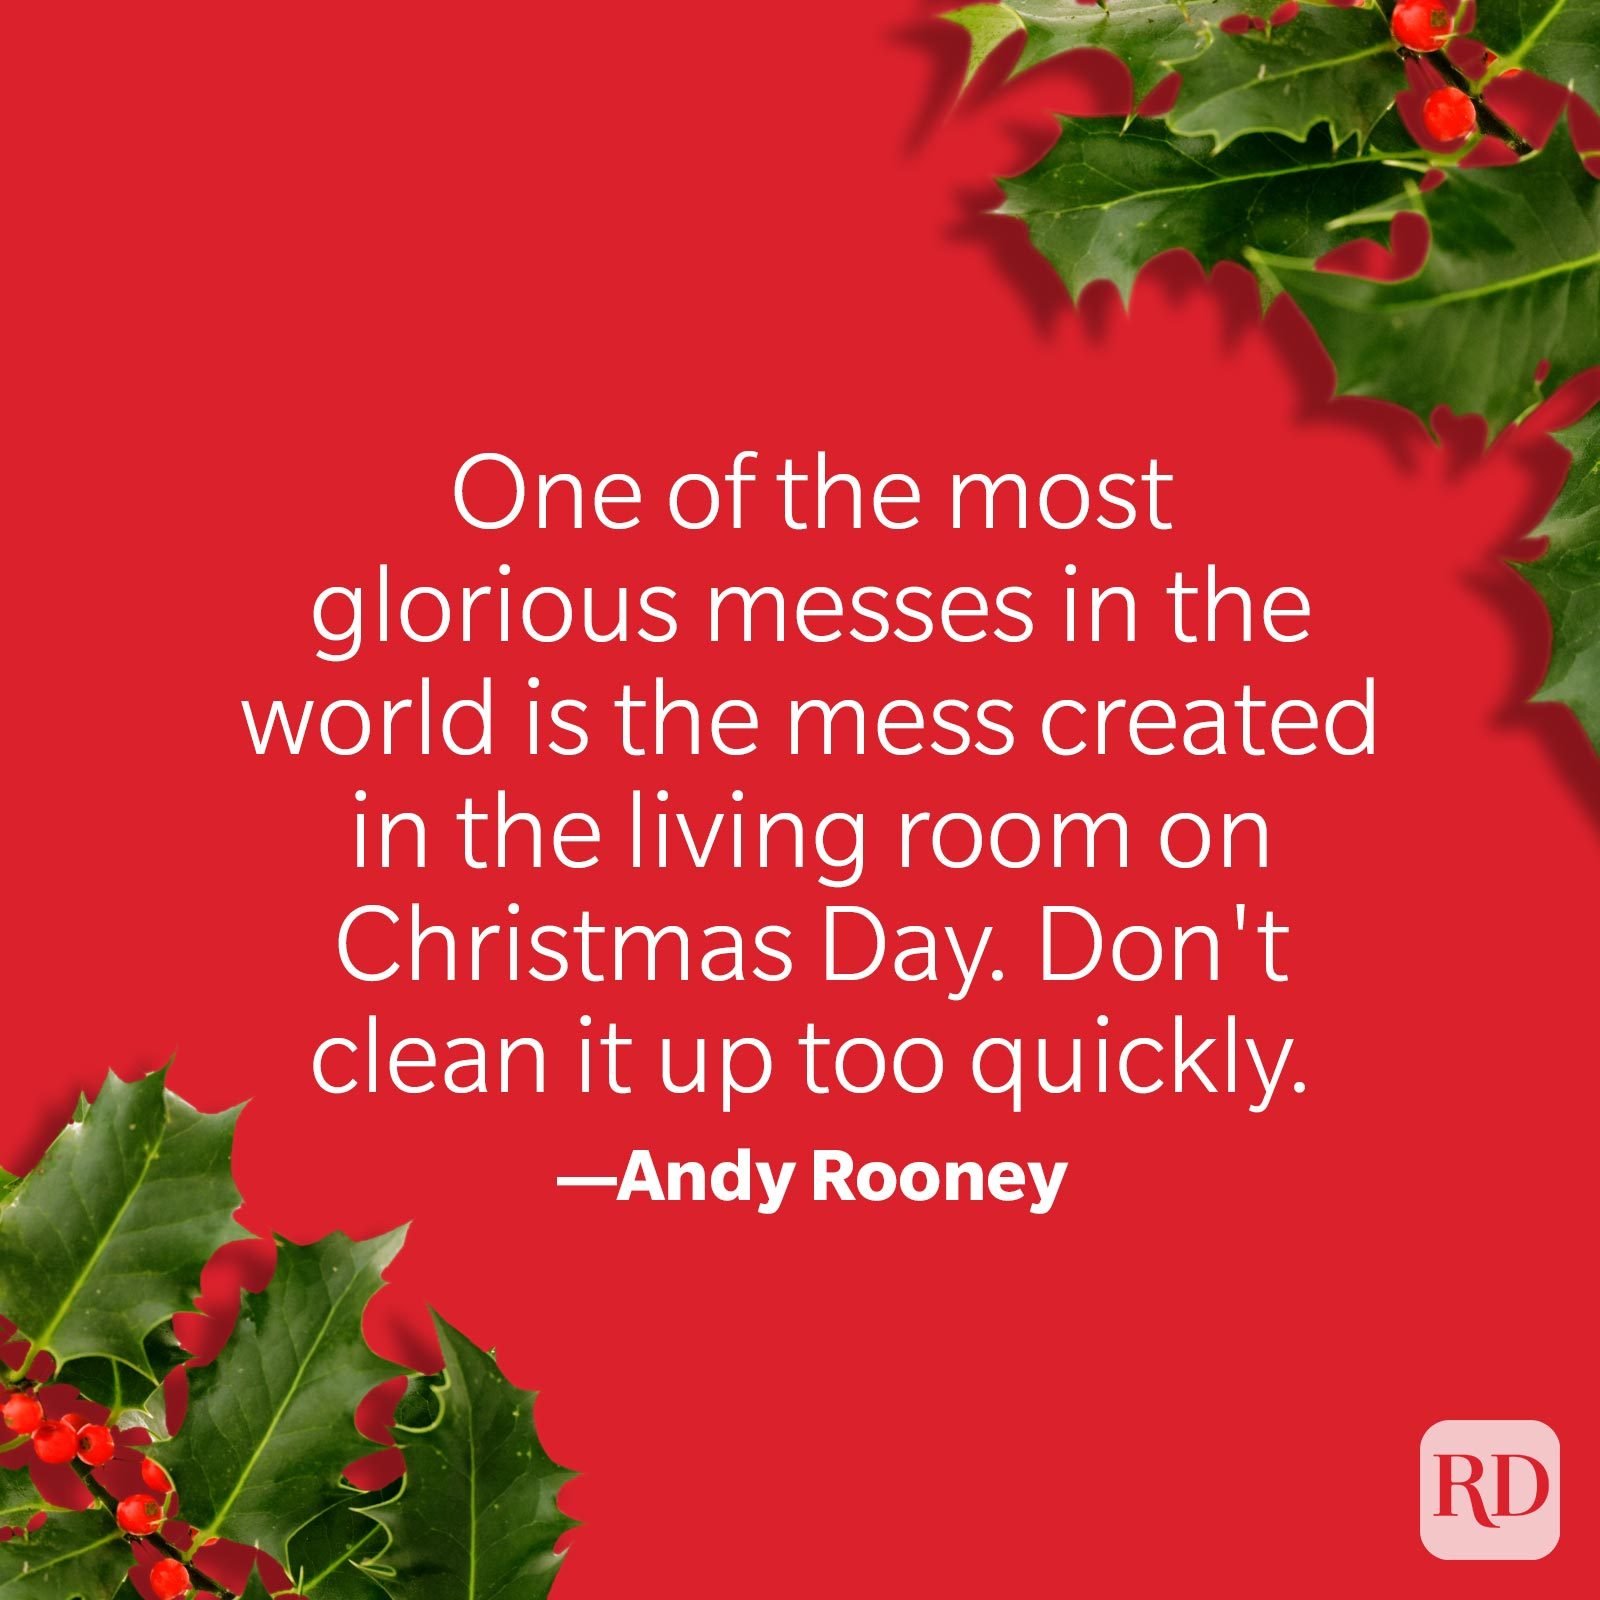 30 Funny Christmas Quotes to Share This Holiday Season | Reader's Digest